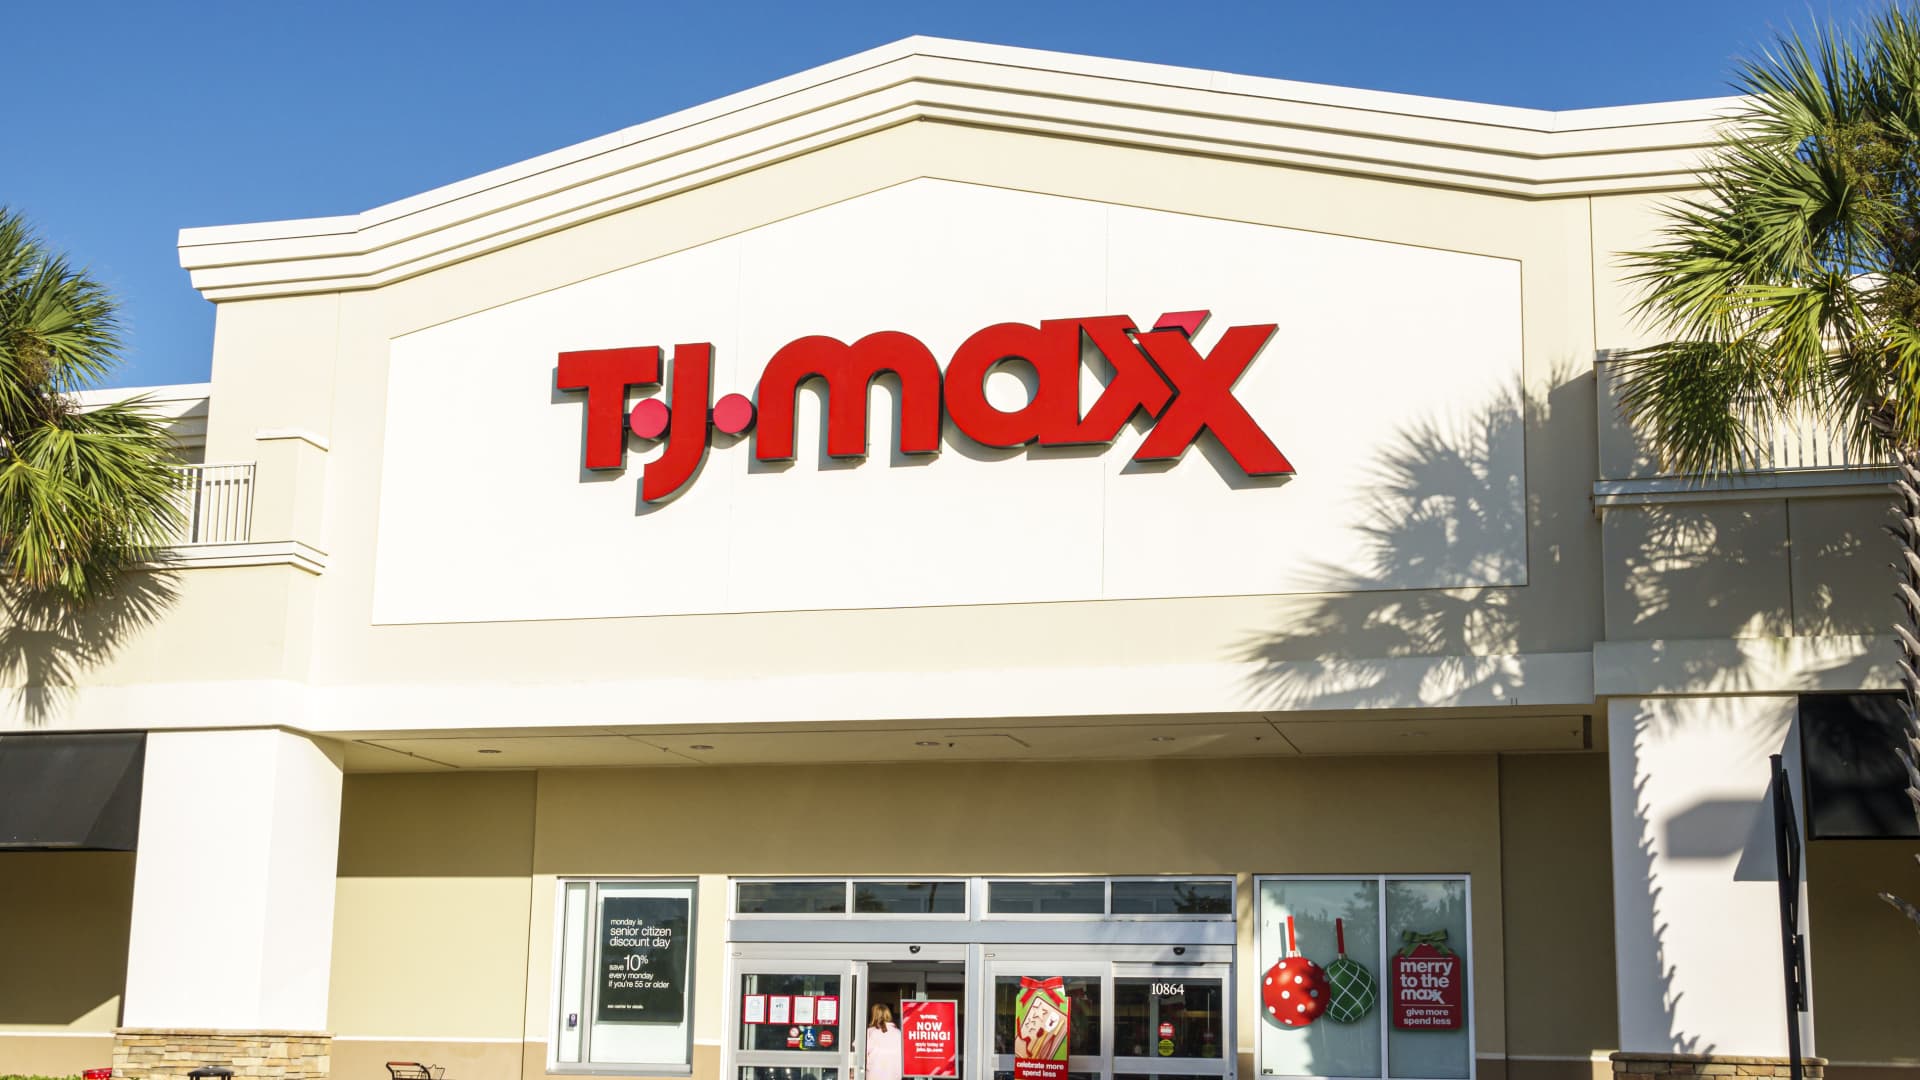 Off-fee retail is poised to withhold taking market allotment. Why is TJX’s stock caught?